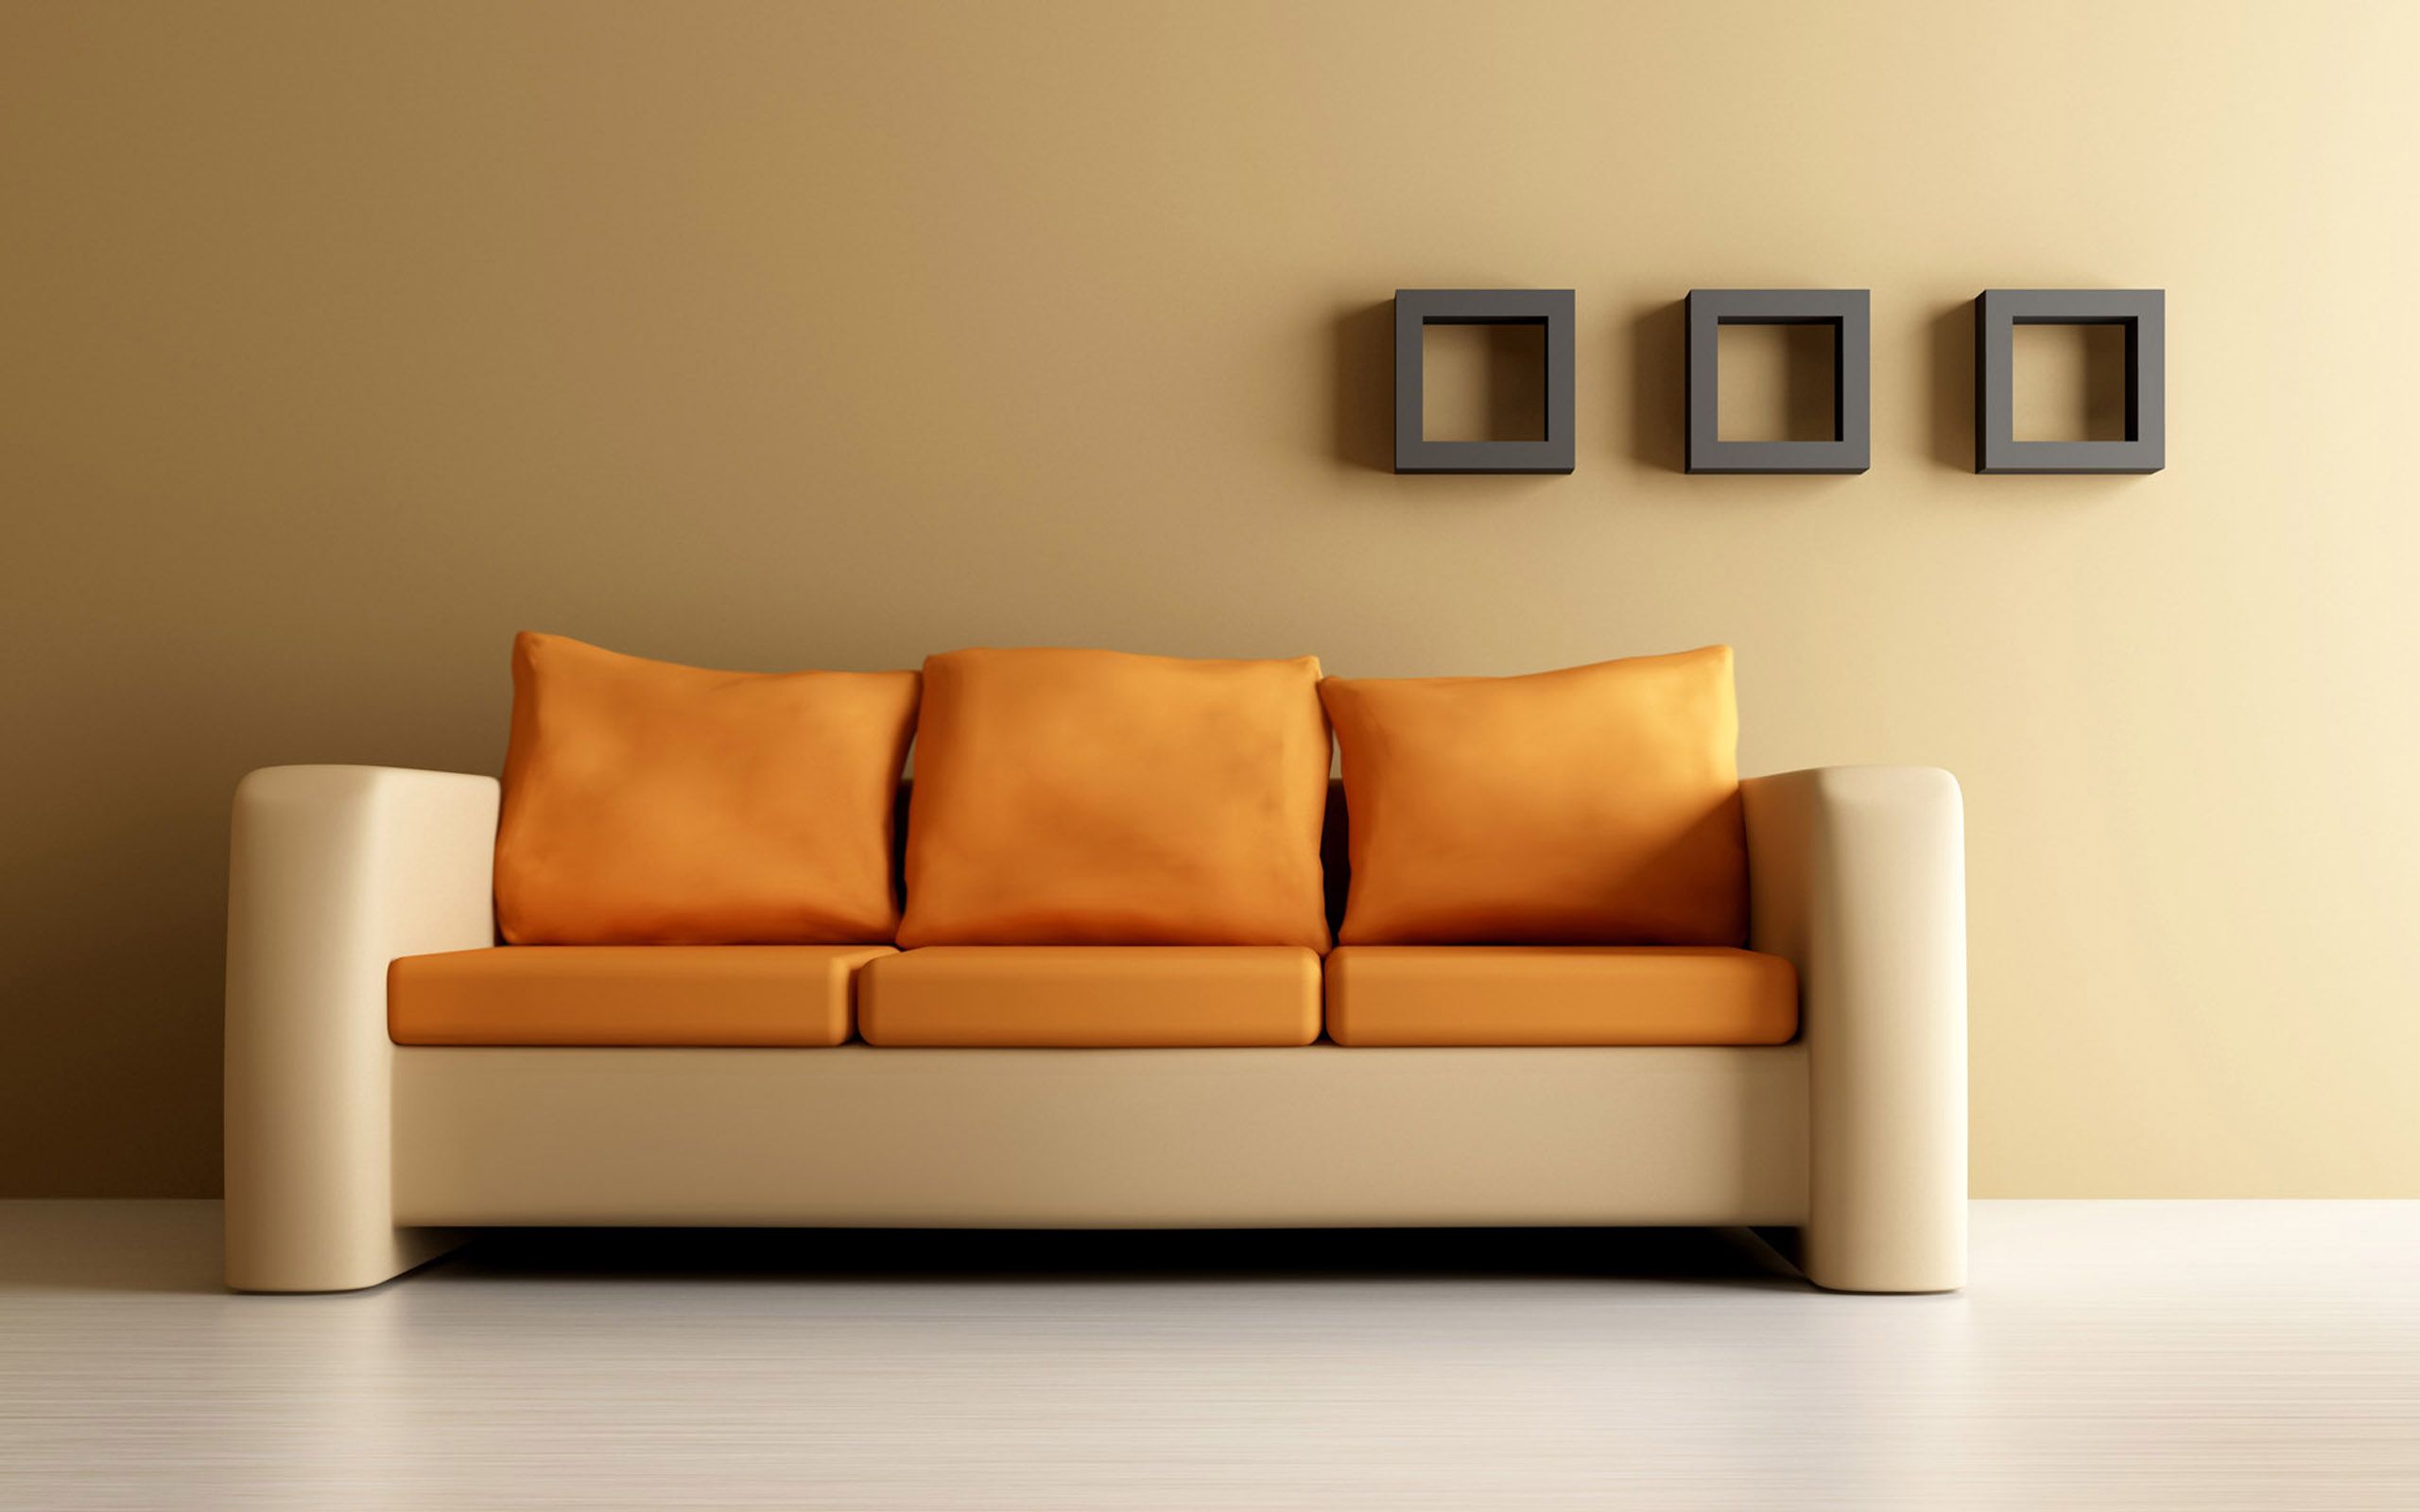 Couch furniture wallpaper | 2560x1600 | 189005 | WallpaperUP